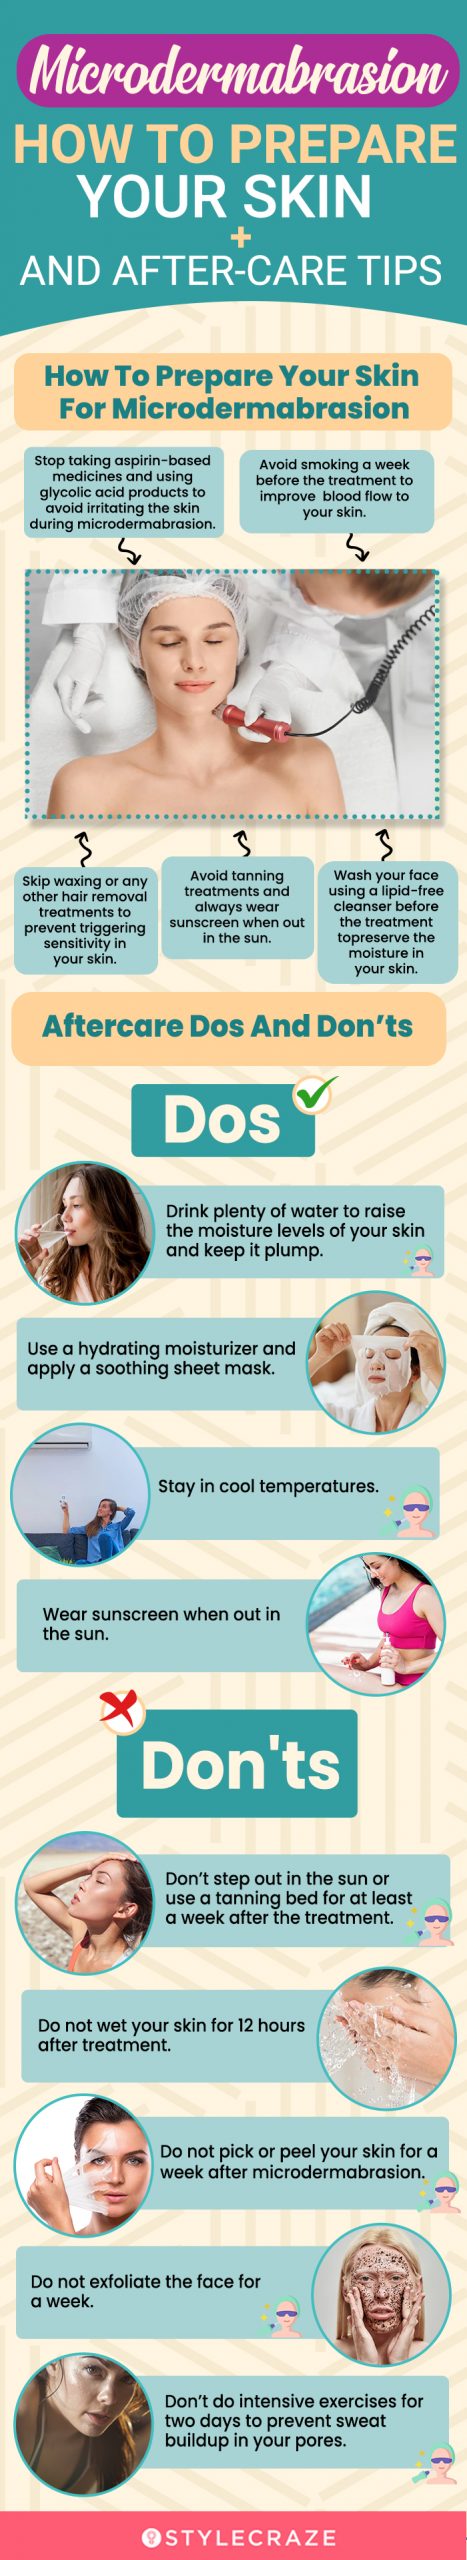 How To Prepare Your Skin For Microdermabrasion